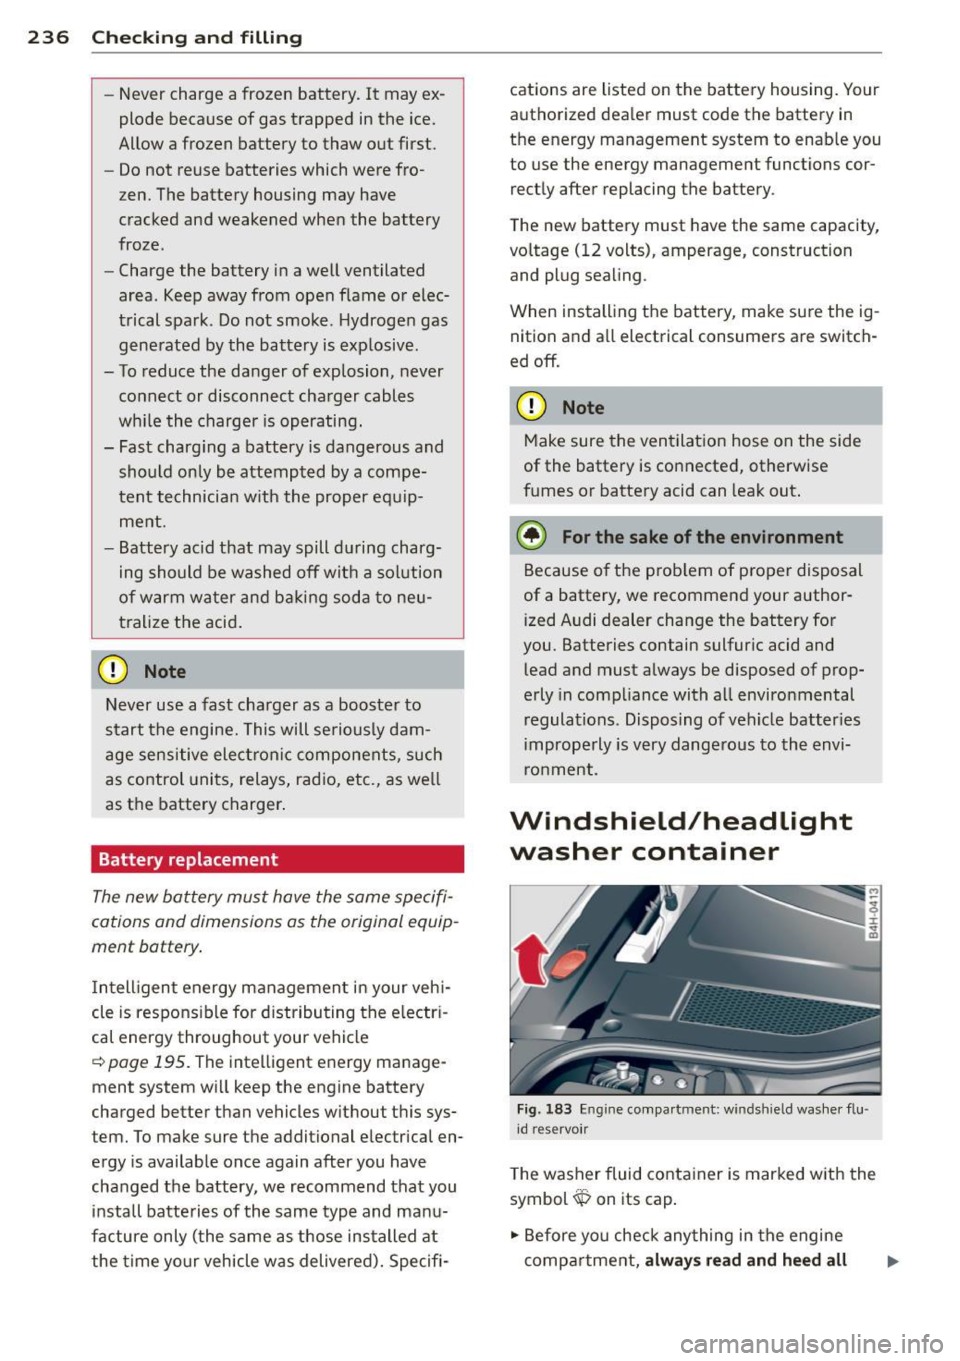 AUDI S8 2011  Owners Manual 236  Checking  and  filling 
-Never  charge  a frozen  battery.  It  may  ex­
plode  because  of  gas  trapped  in the  ice. 
Allow a frozen  battery  to  thaw  out  first. 
- Do not  reuse batteries